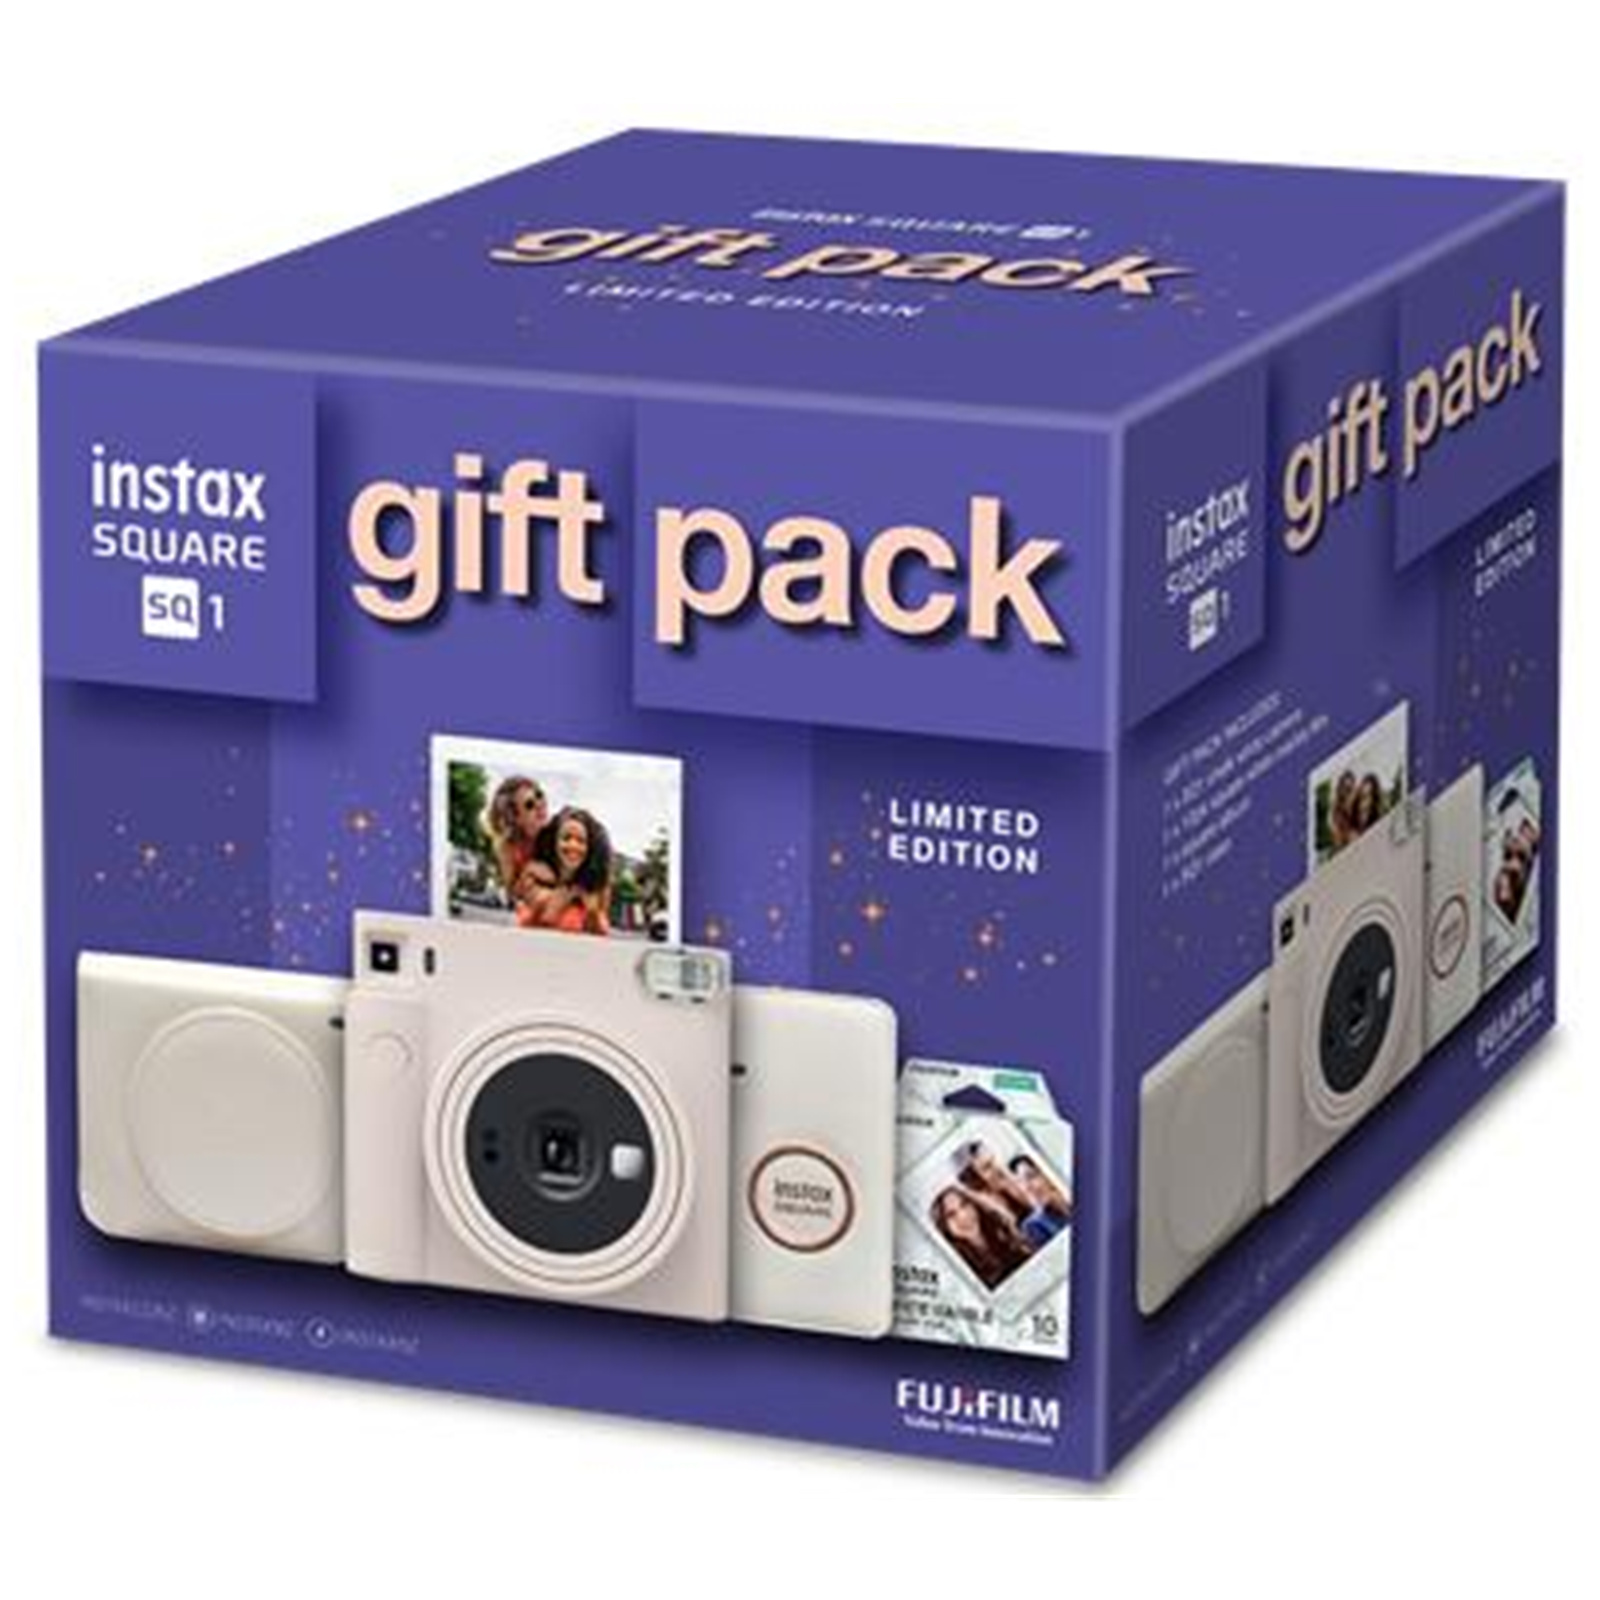 Buy the FujiFilm Instax Square SQ1 Instant Camera Chalk White - Gift Pack...  ( FC50 ) online - PBTech.com/au